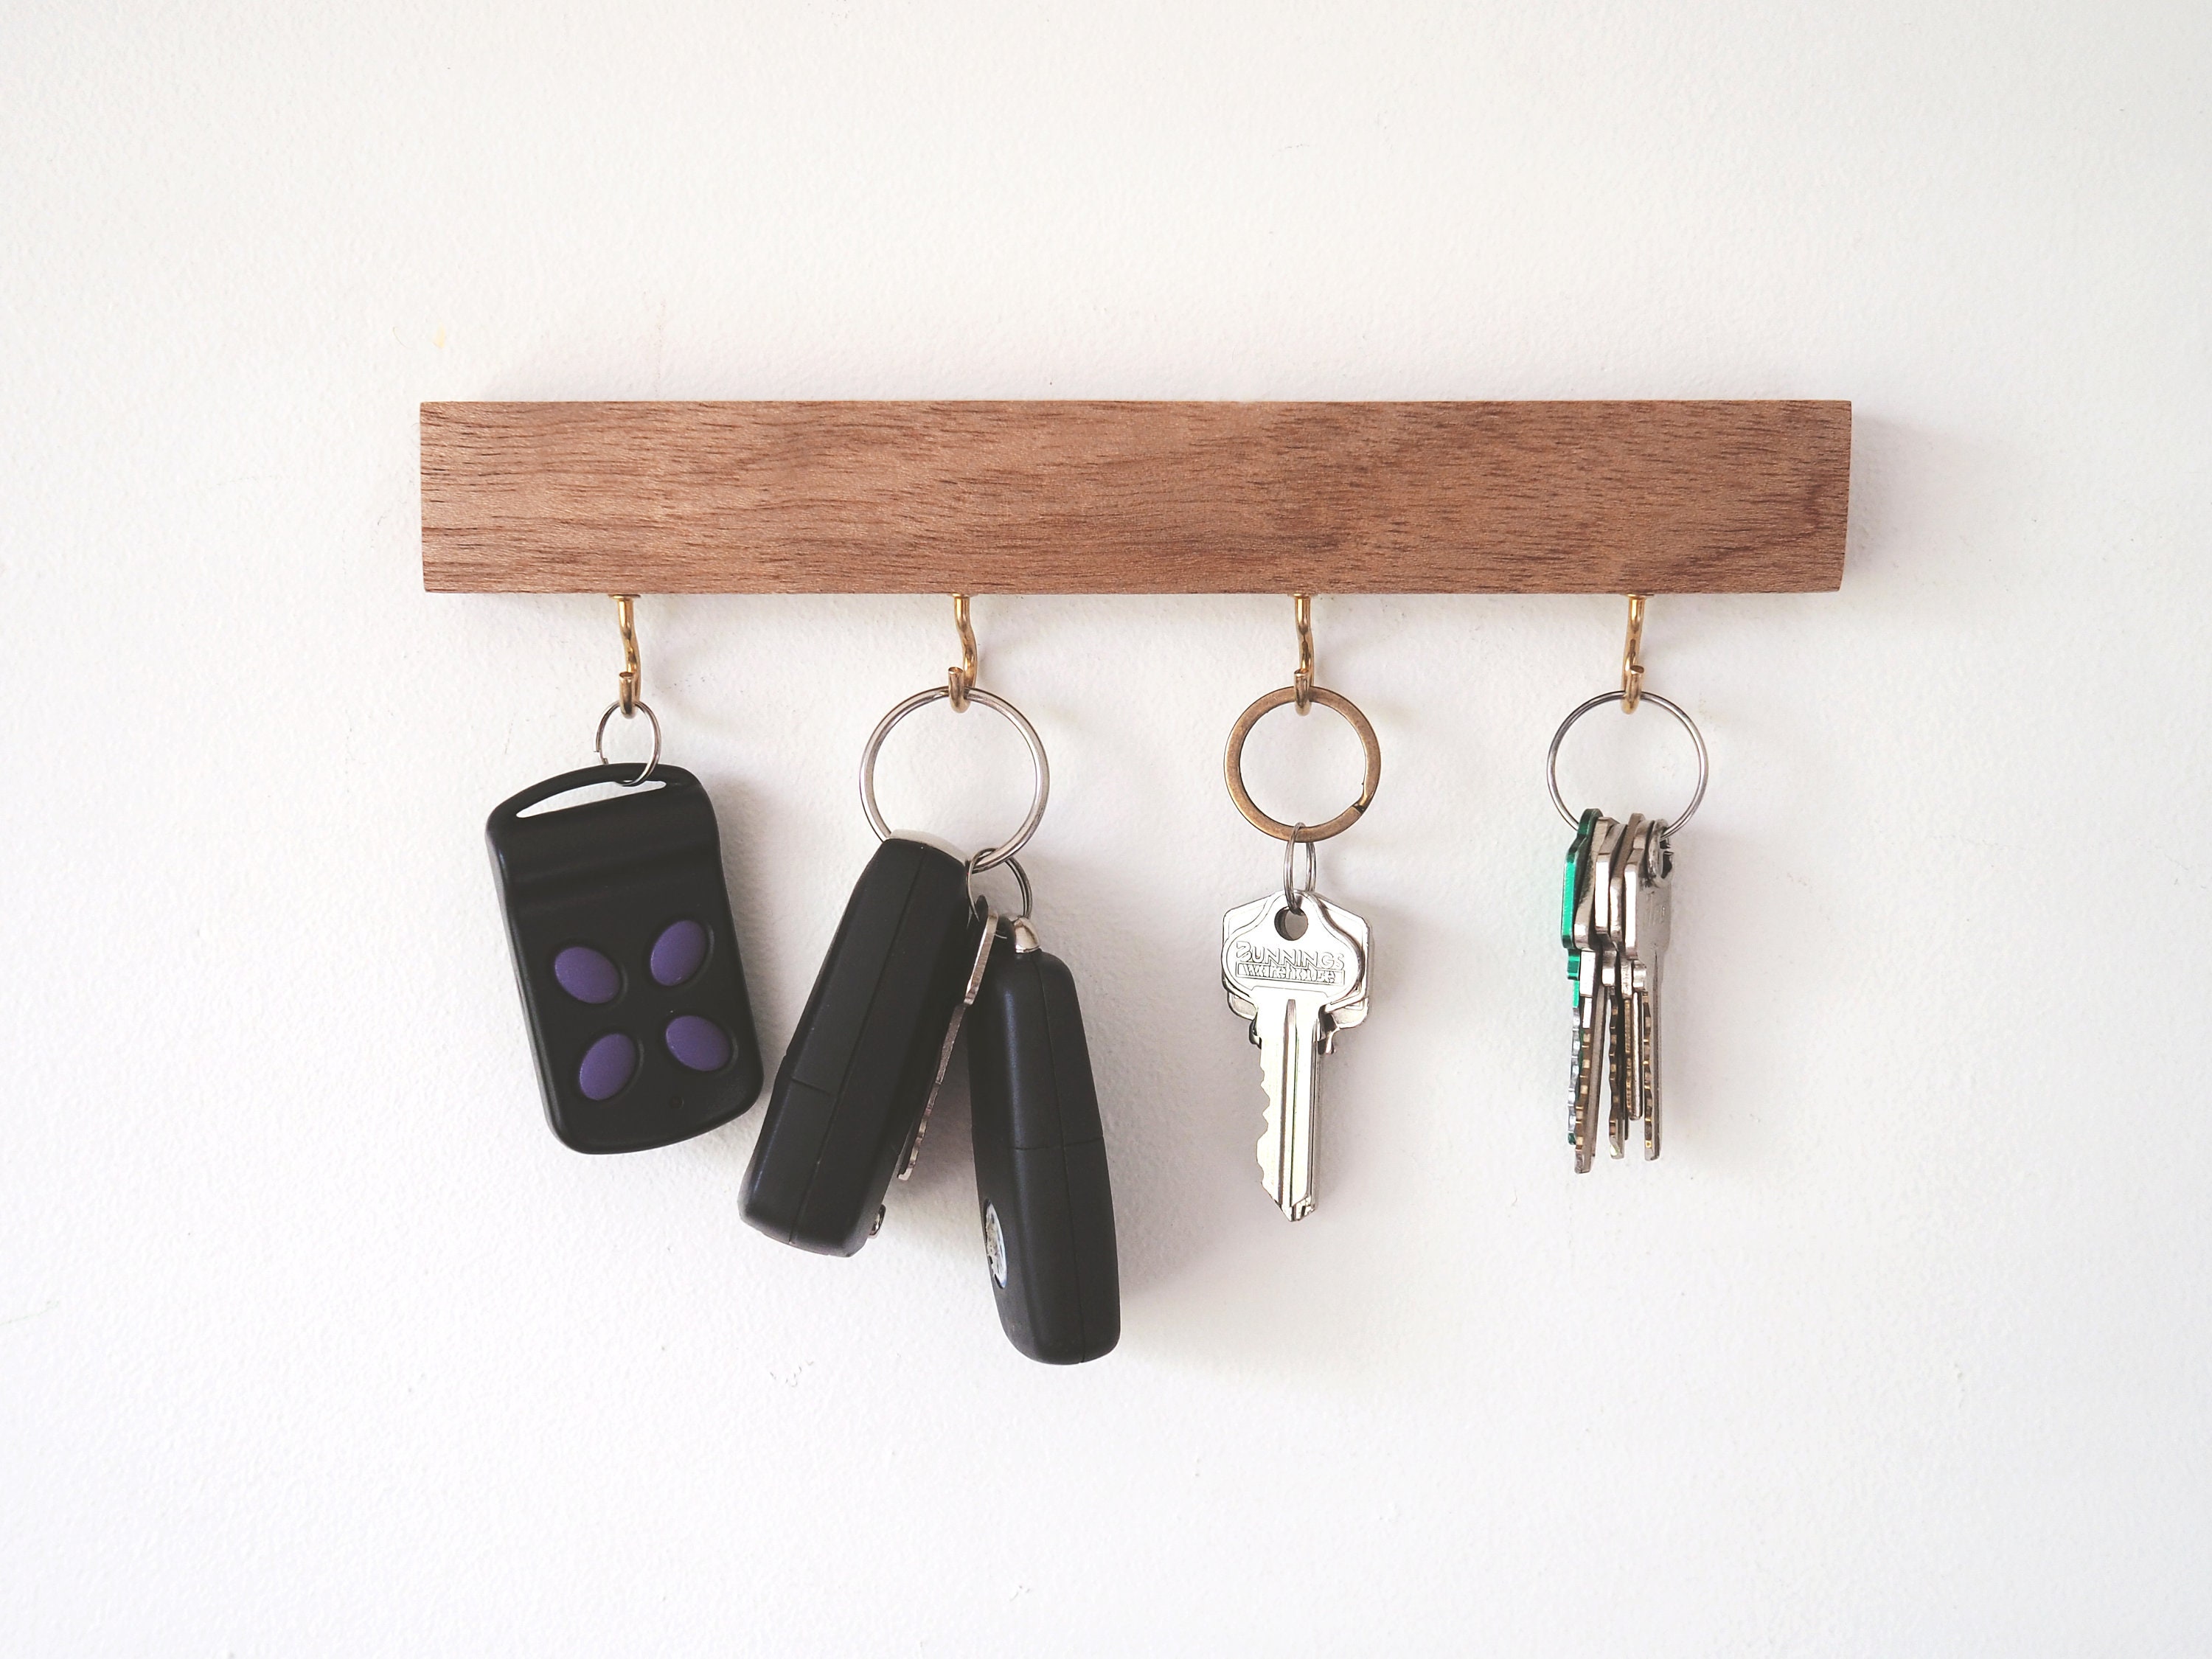 Home Sweet Home Personalized Key Ring Holder for Wall, Key Hook